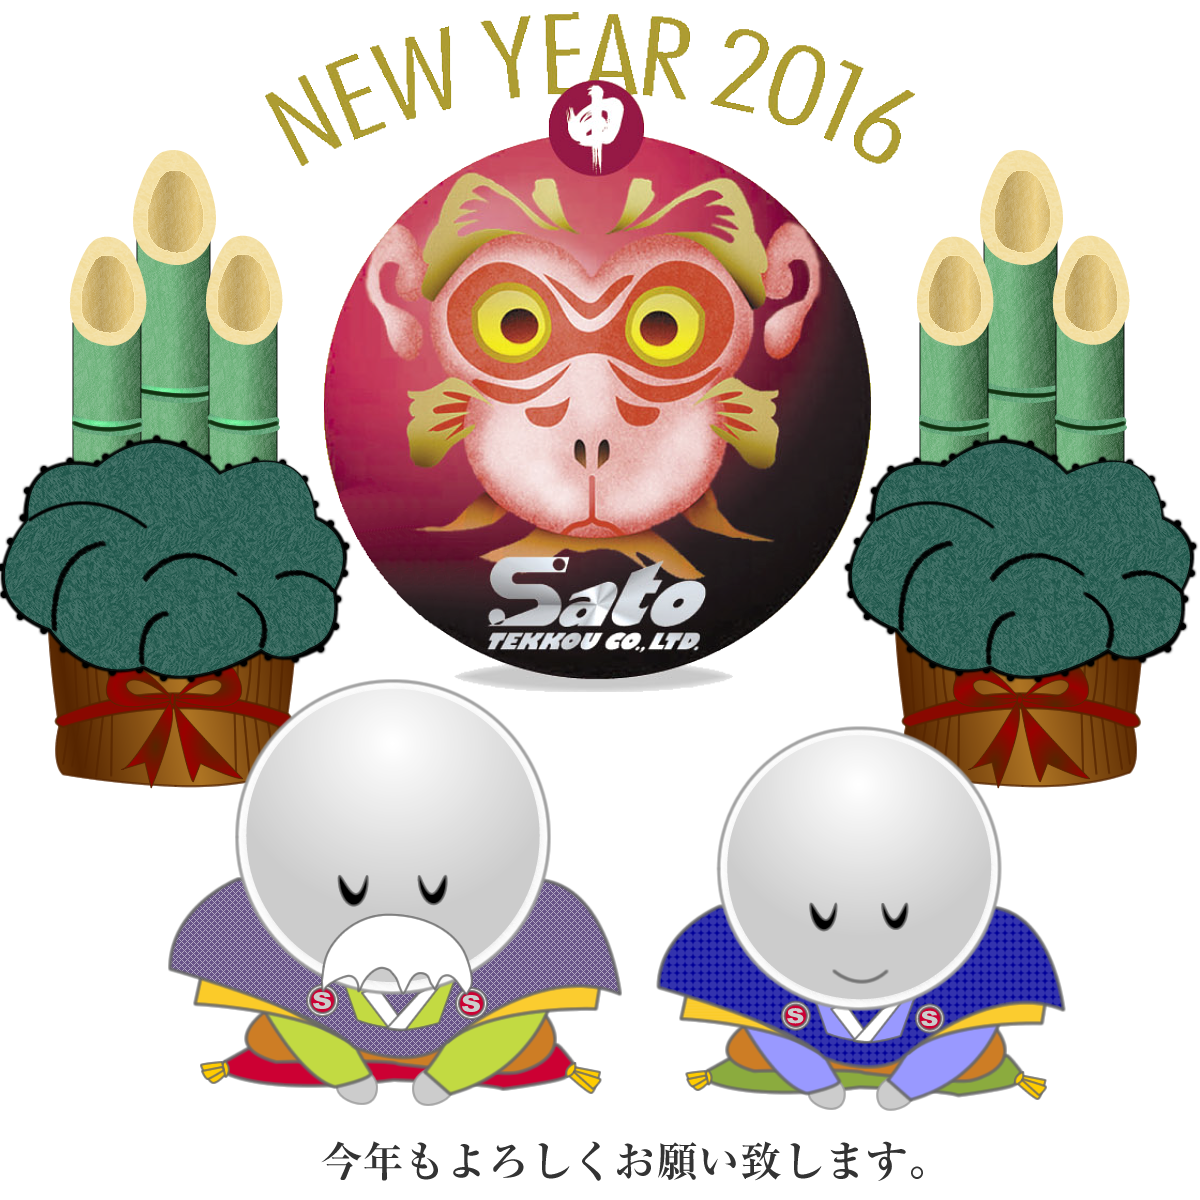 2016-new_year_card.png